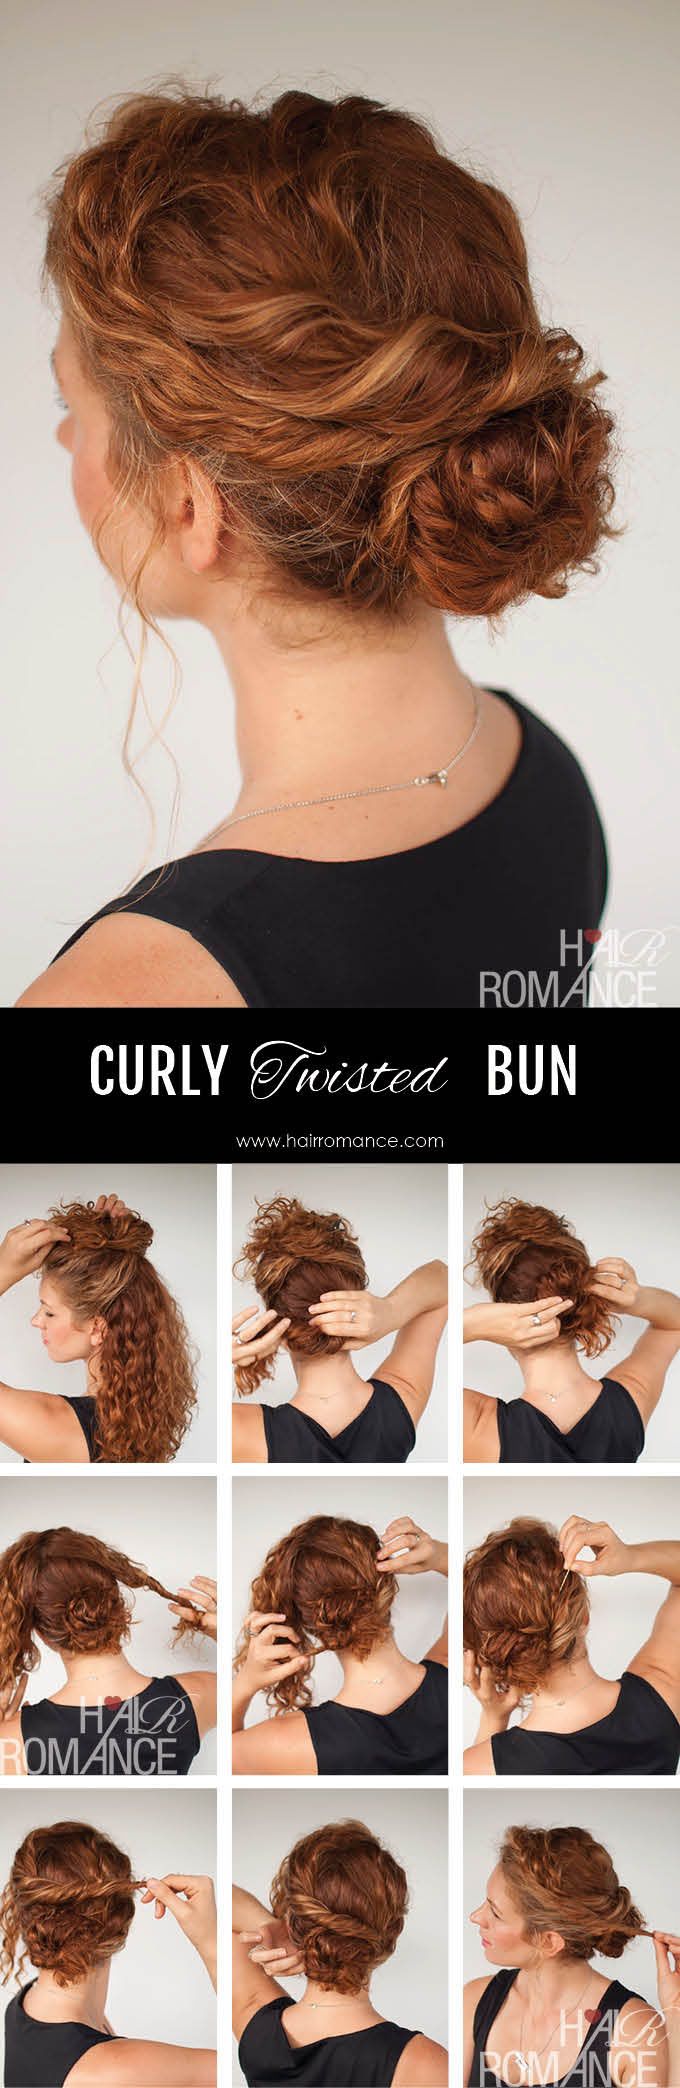 Wedding Hairstyles Half Up Half Down Curly Hair Tutorial Easy Twisted Bun Hairstyle Wedding Lande Leading Wedding Magazine Ideas Inspirations The Hottest New Wedding Trends